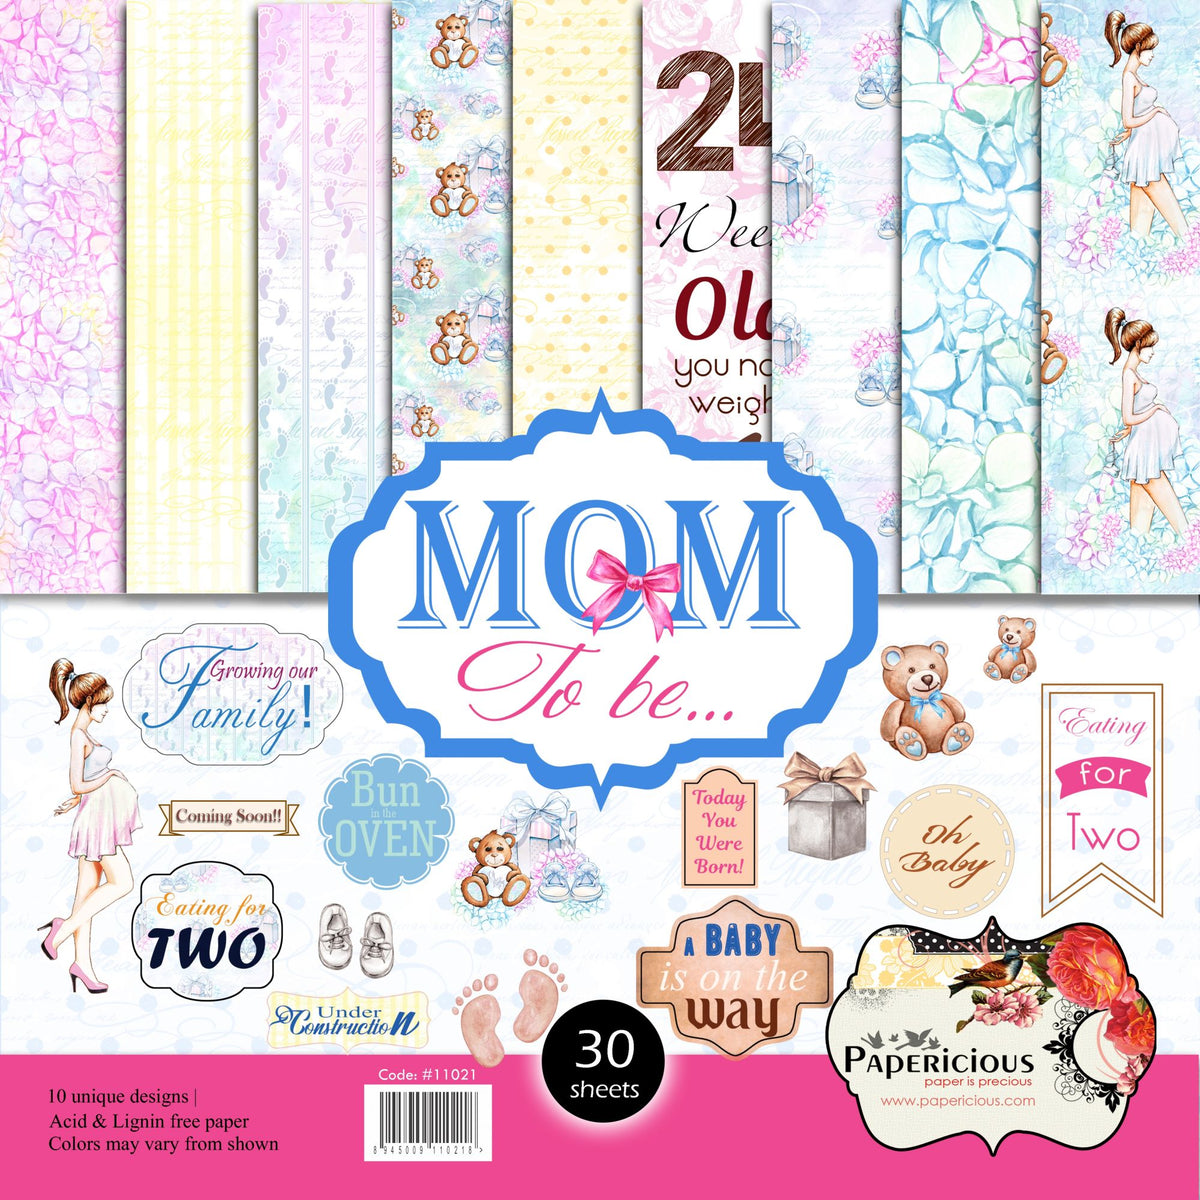 PAPERICIOUS - Mom To Be -  Designer Pattern Printed Scrapbook Papers / 30 sheets